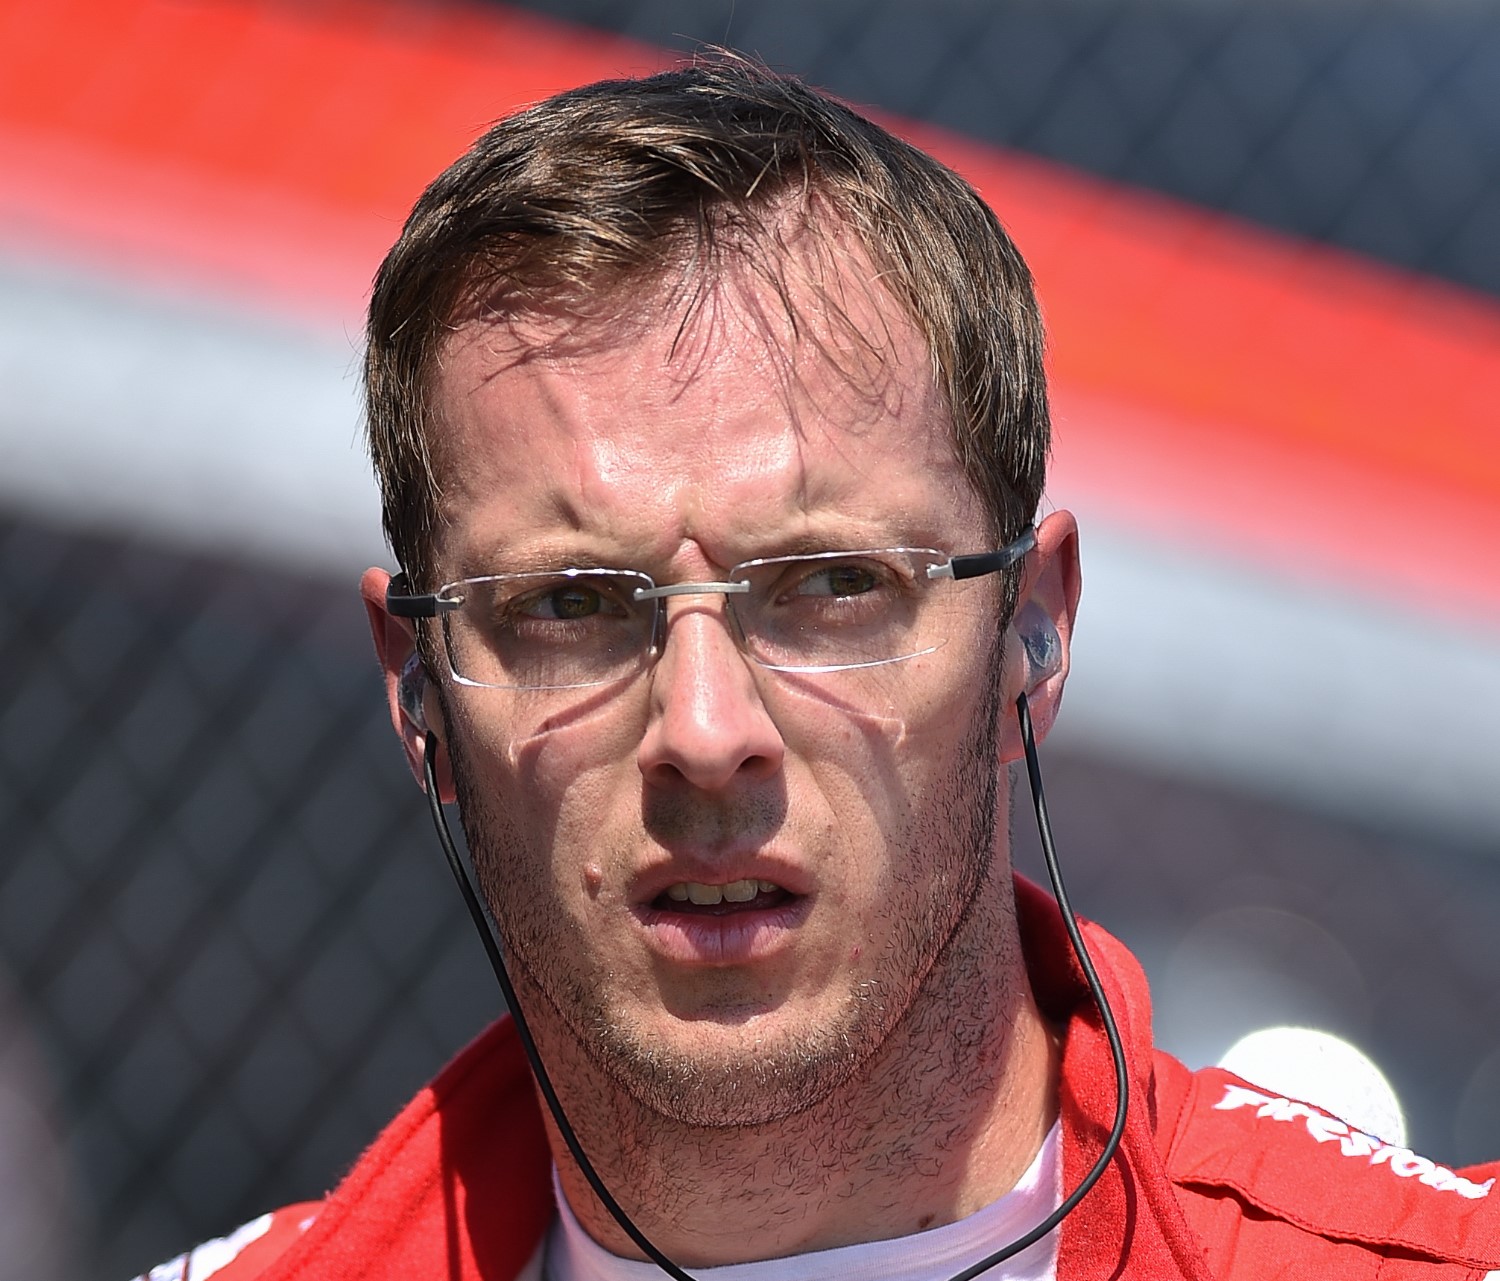 Bourdais disgusted with comments made by anti-American Guenther Steiner